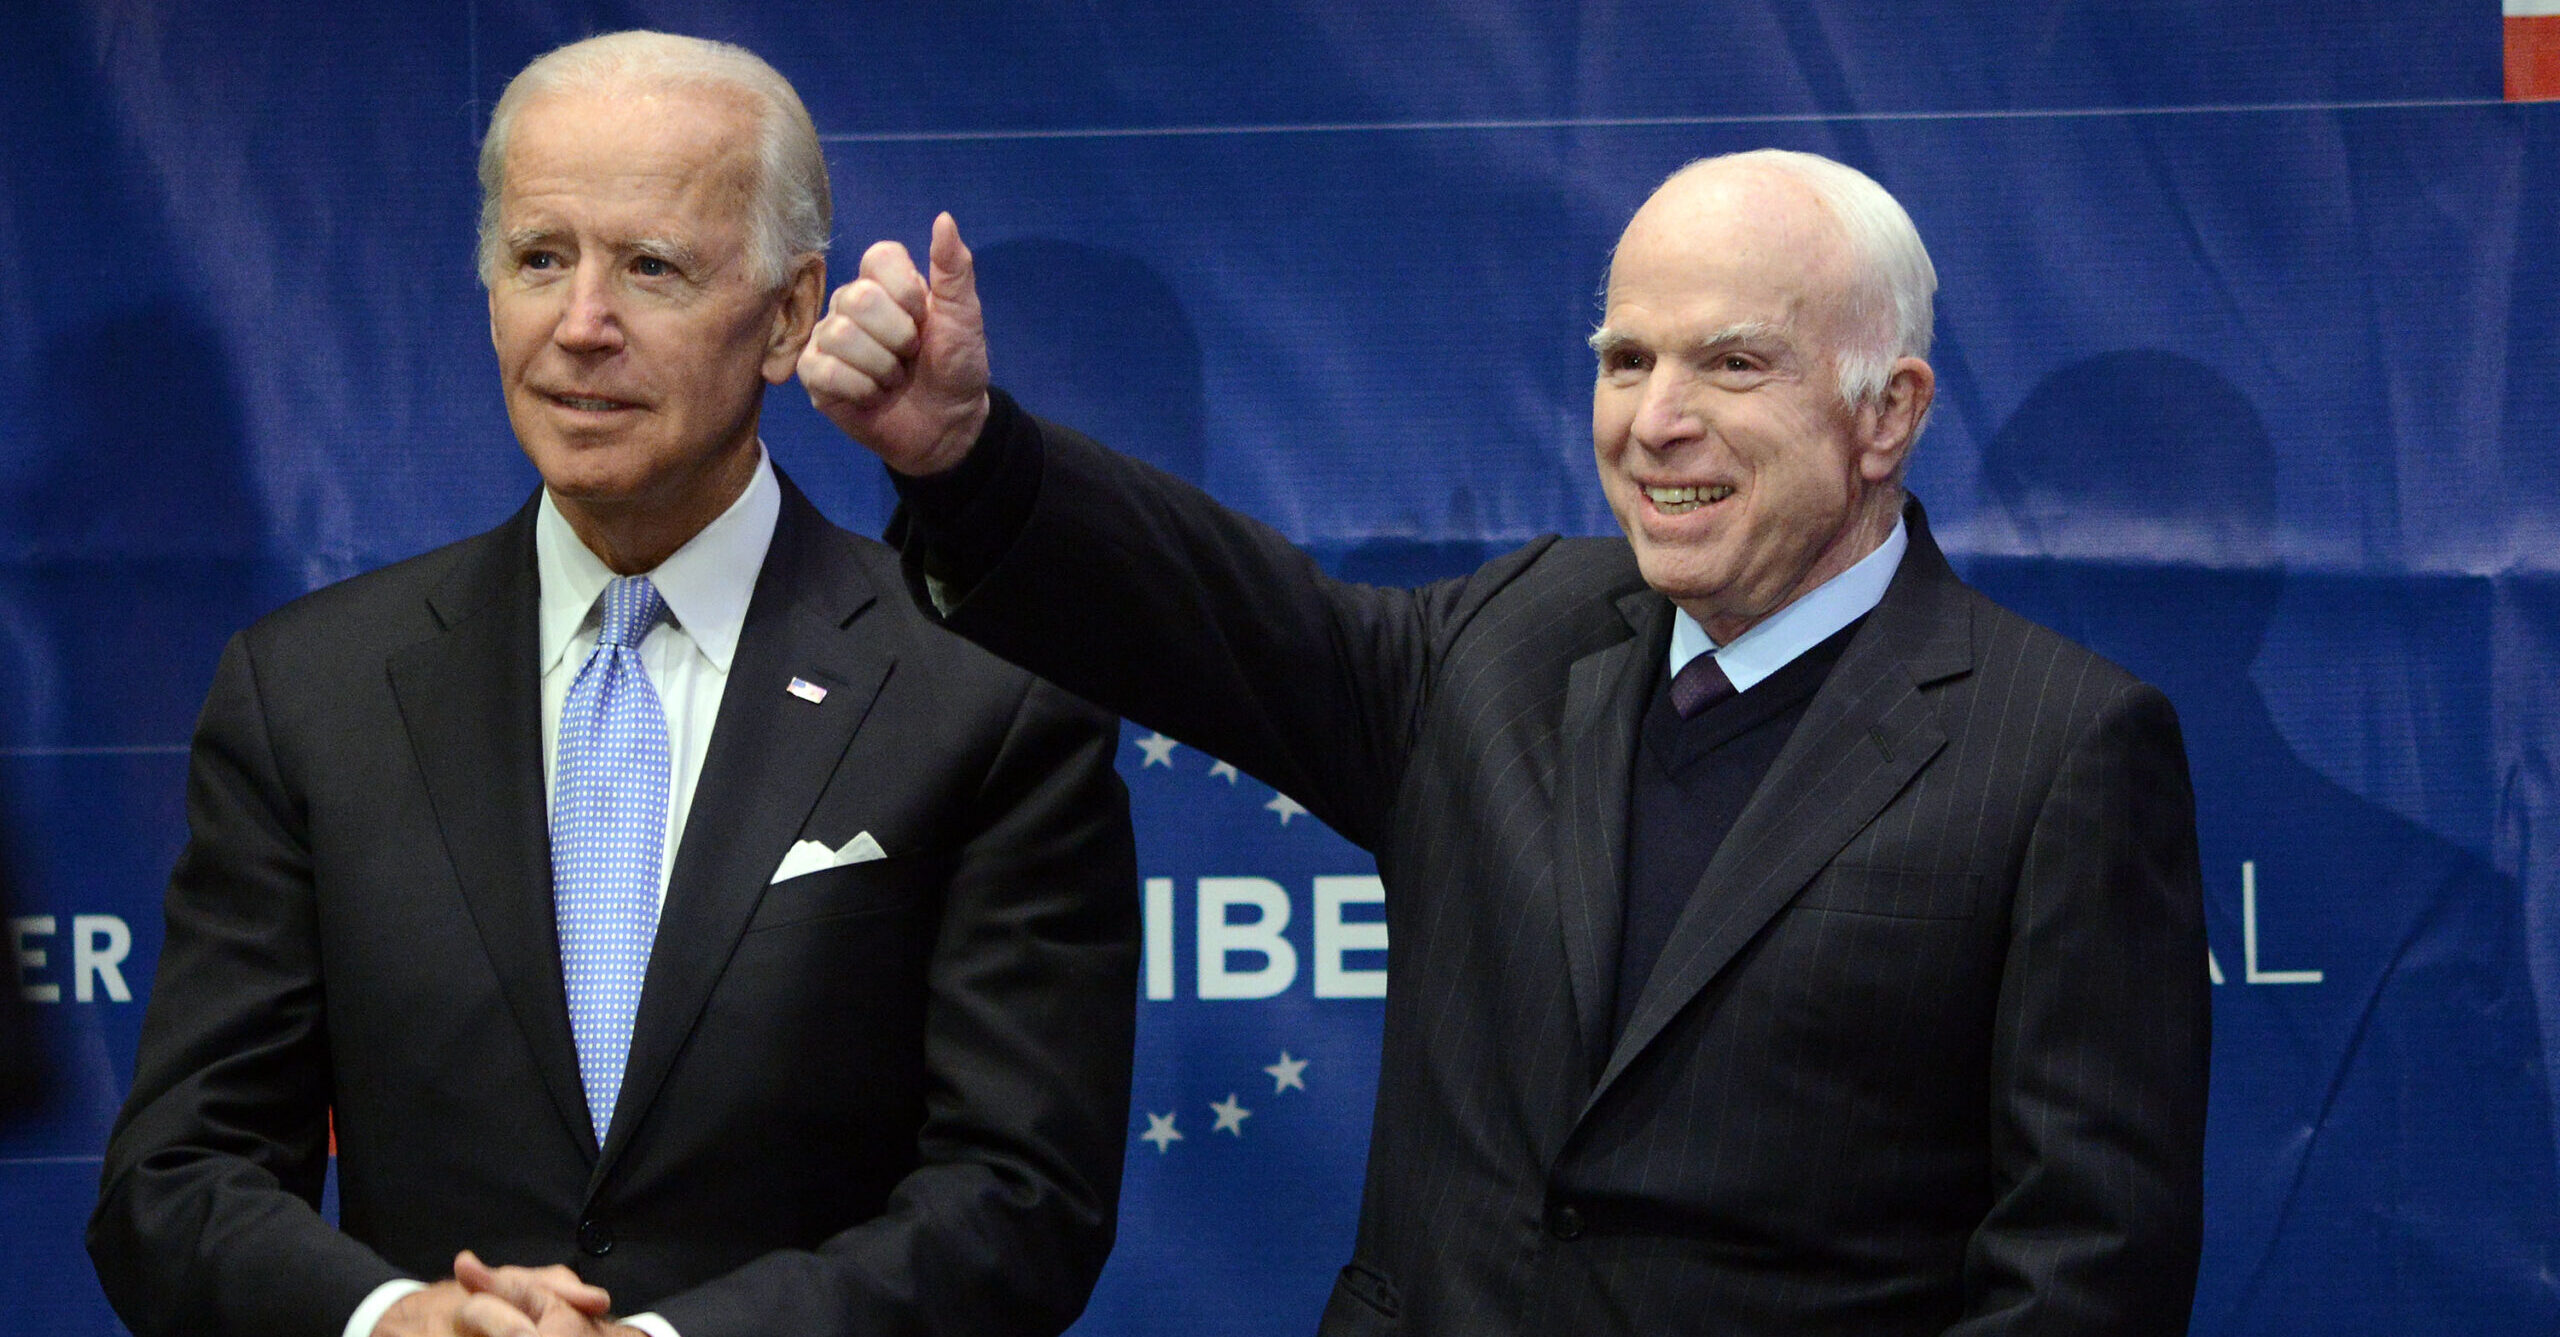 Biden Falsely Claims He ‘Never Said a Negative Thing’ About John McCain — Apparently Forgetting 2008 Campaign